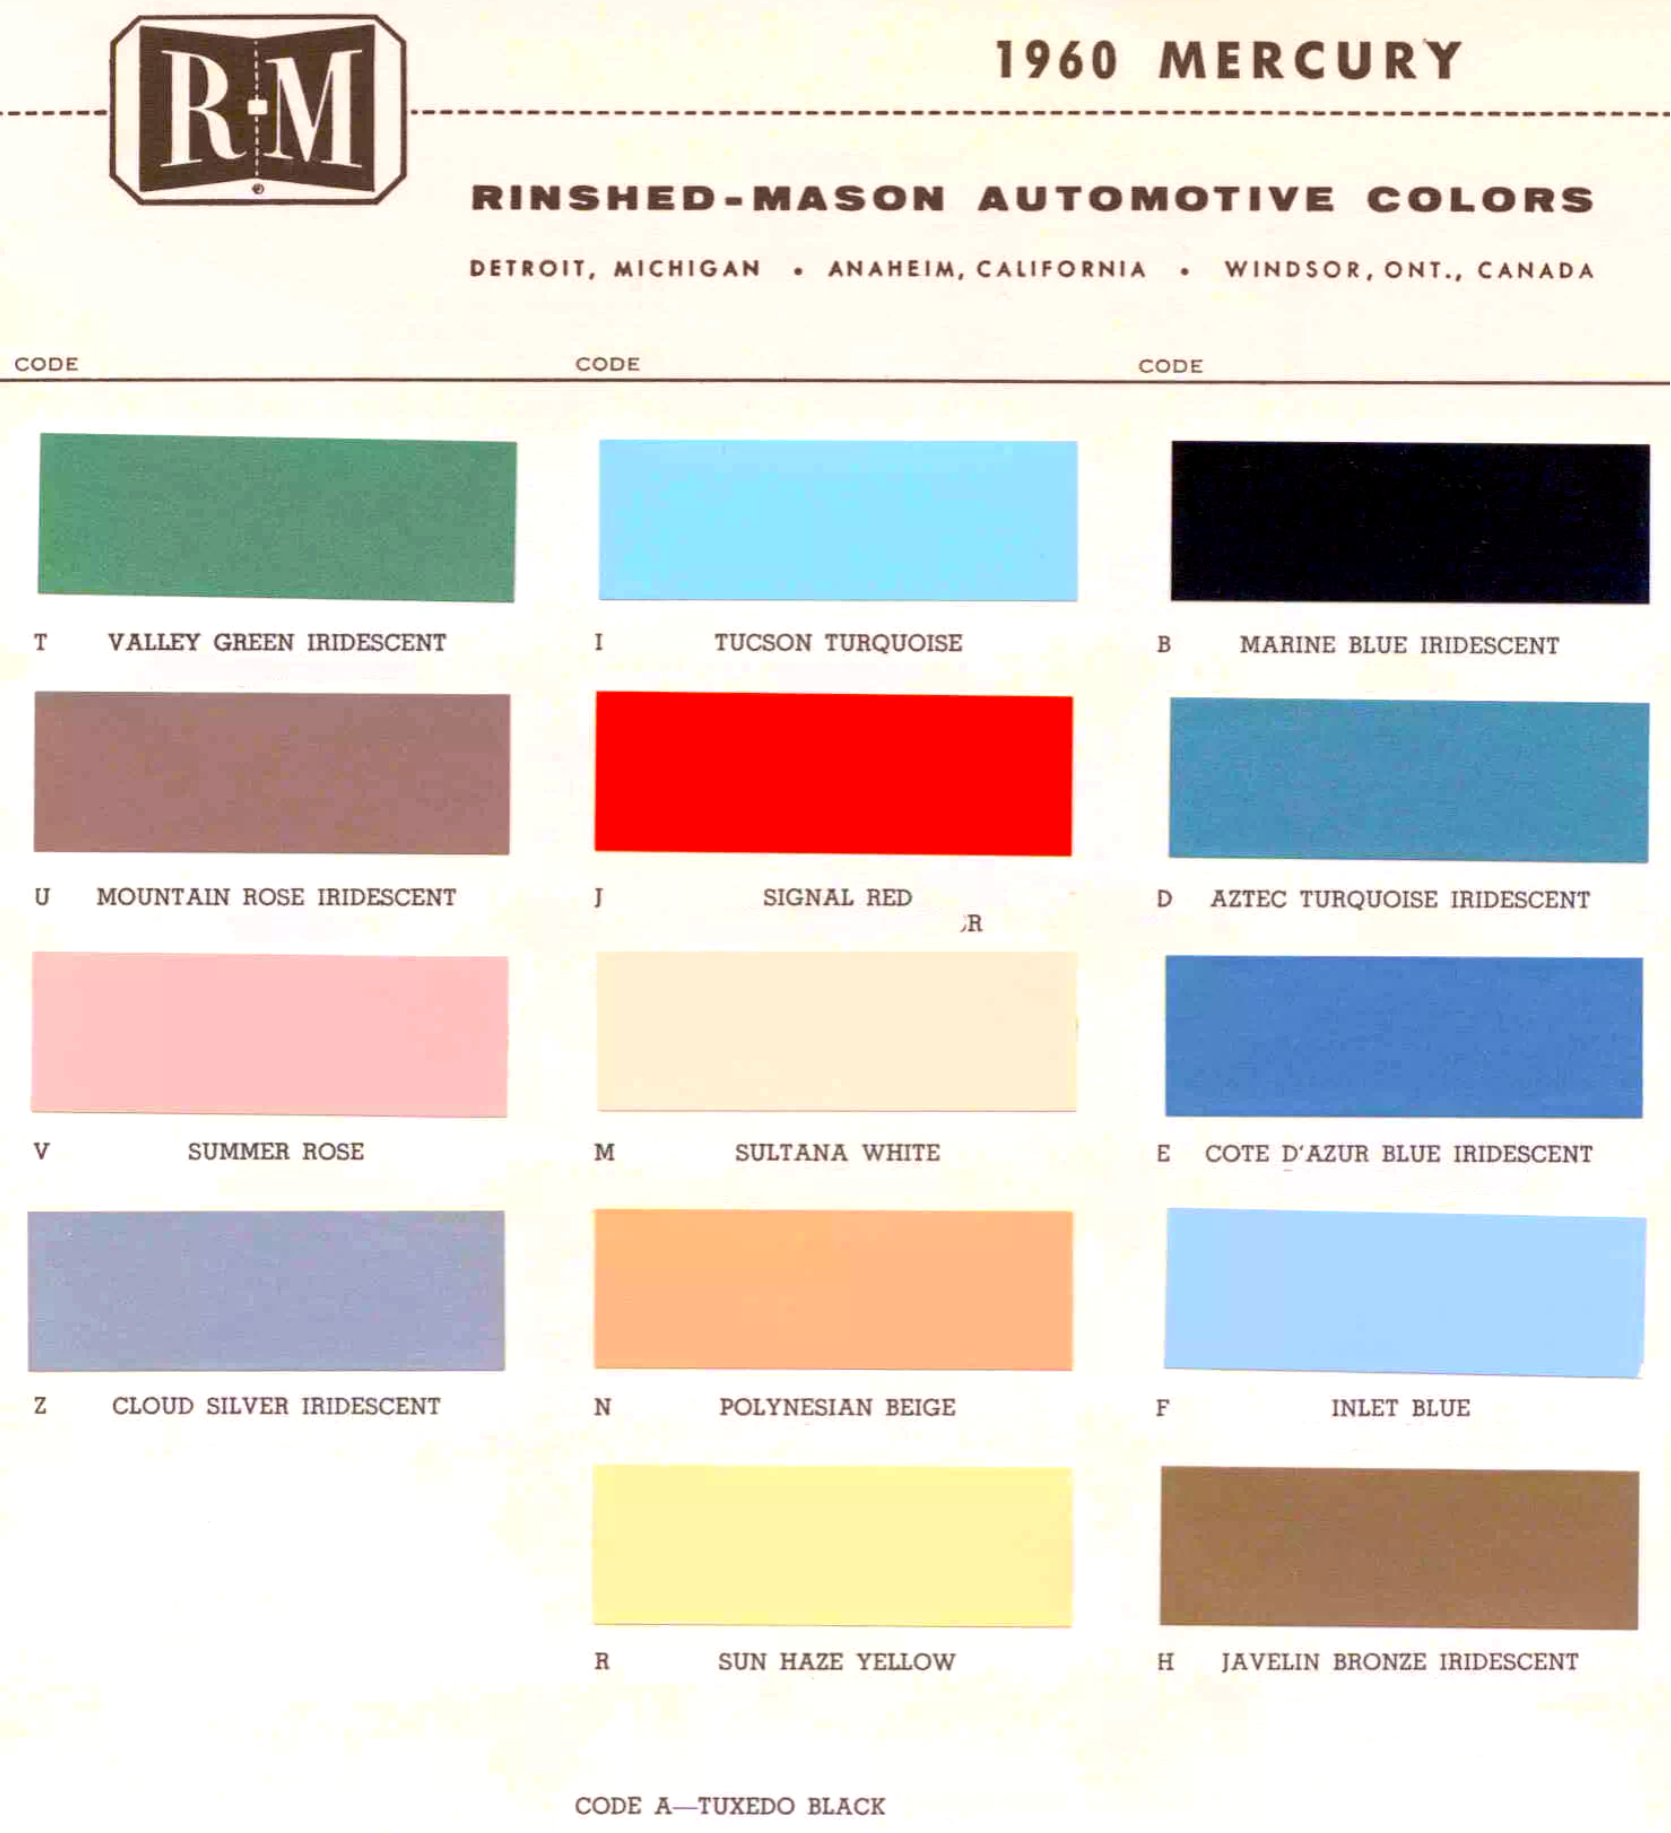 Color examples, Ordering Codes, OEM Paint Code, Color Swatches, and Color Names for the Ford Motor Company in 1960